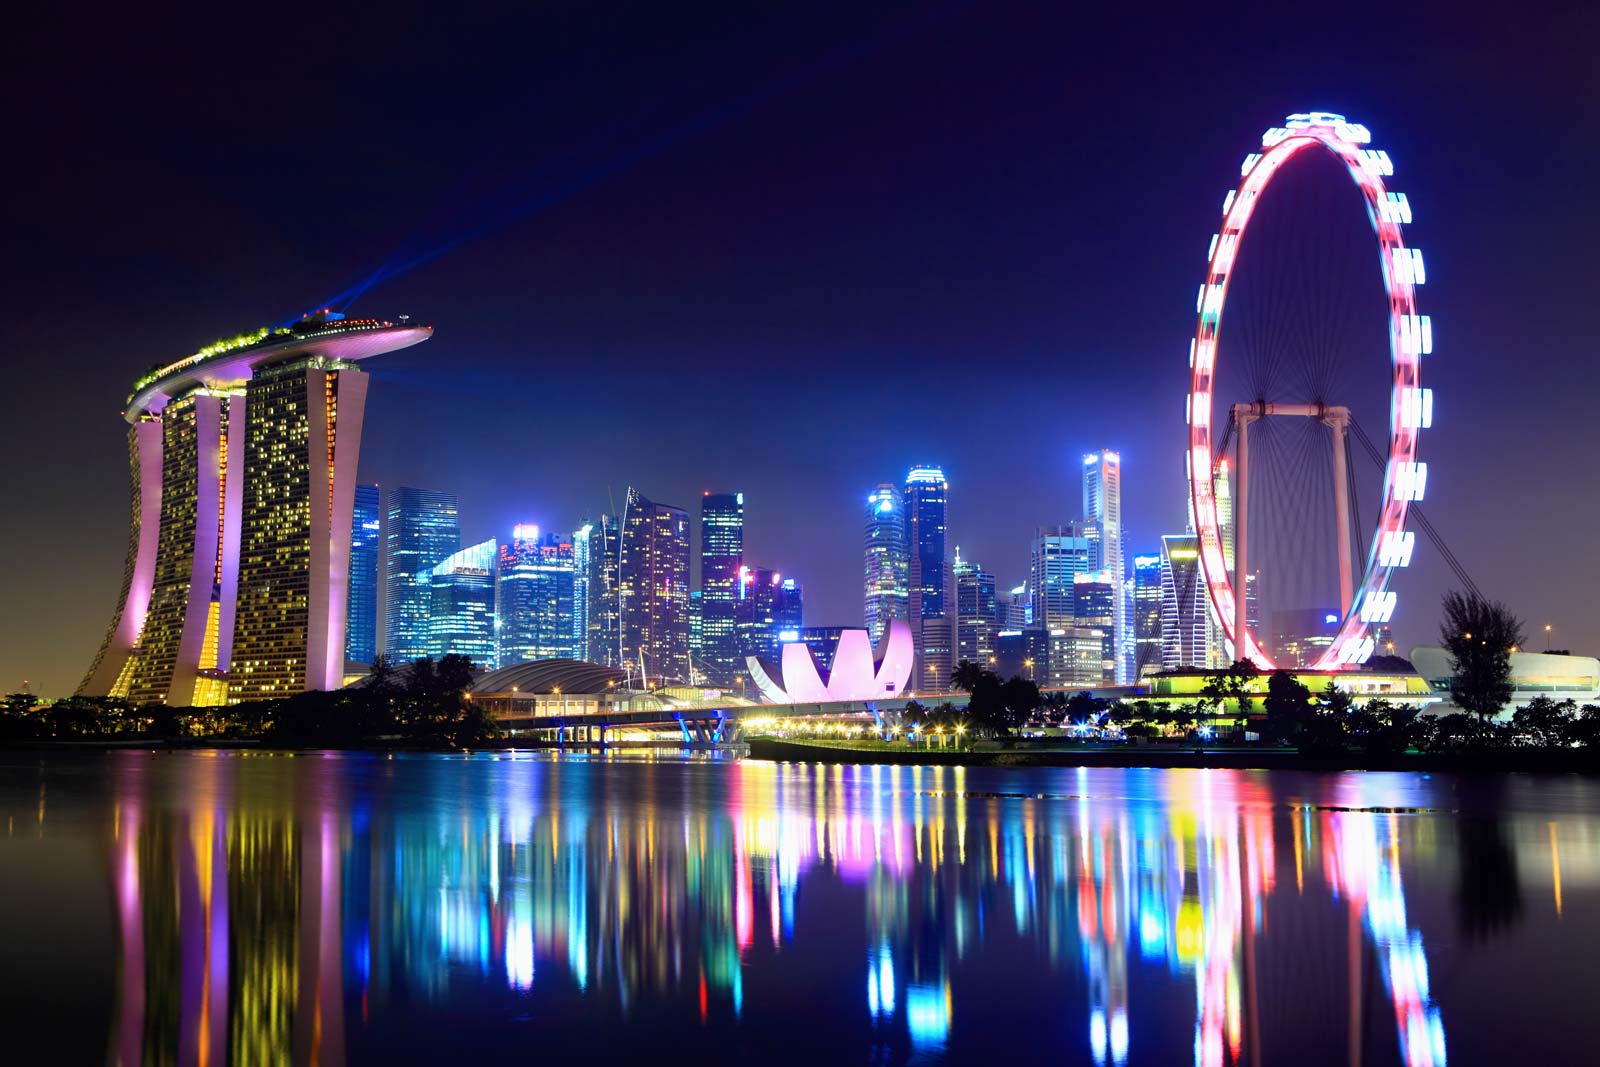 singapore flyer attractions in singapore